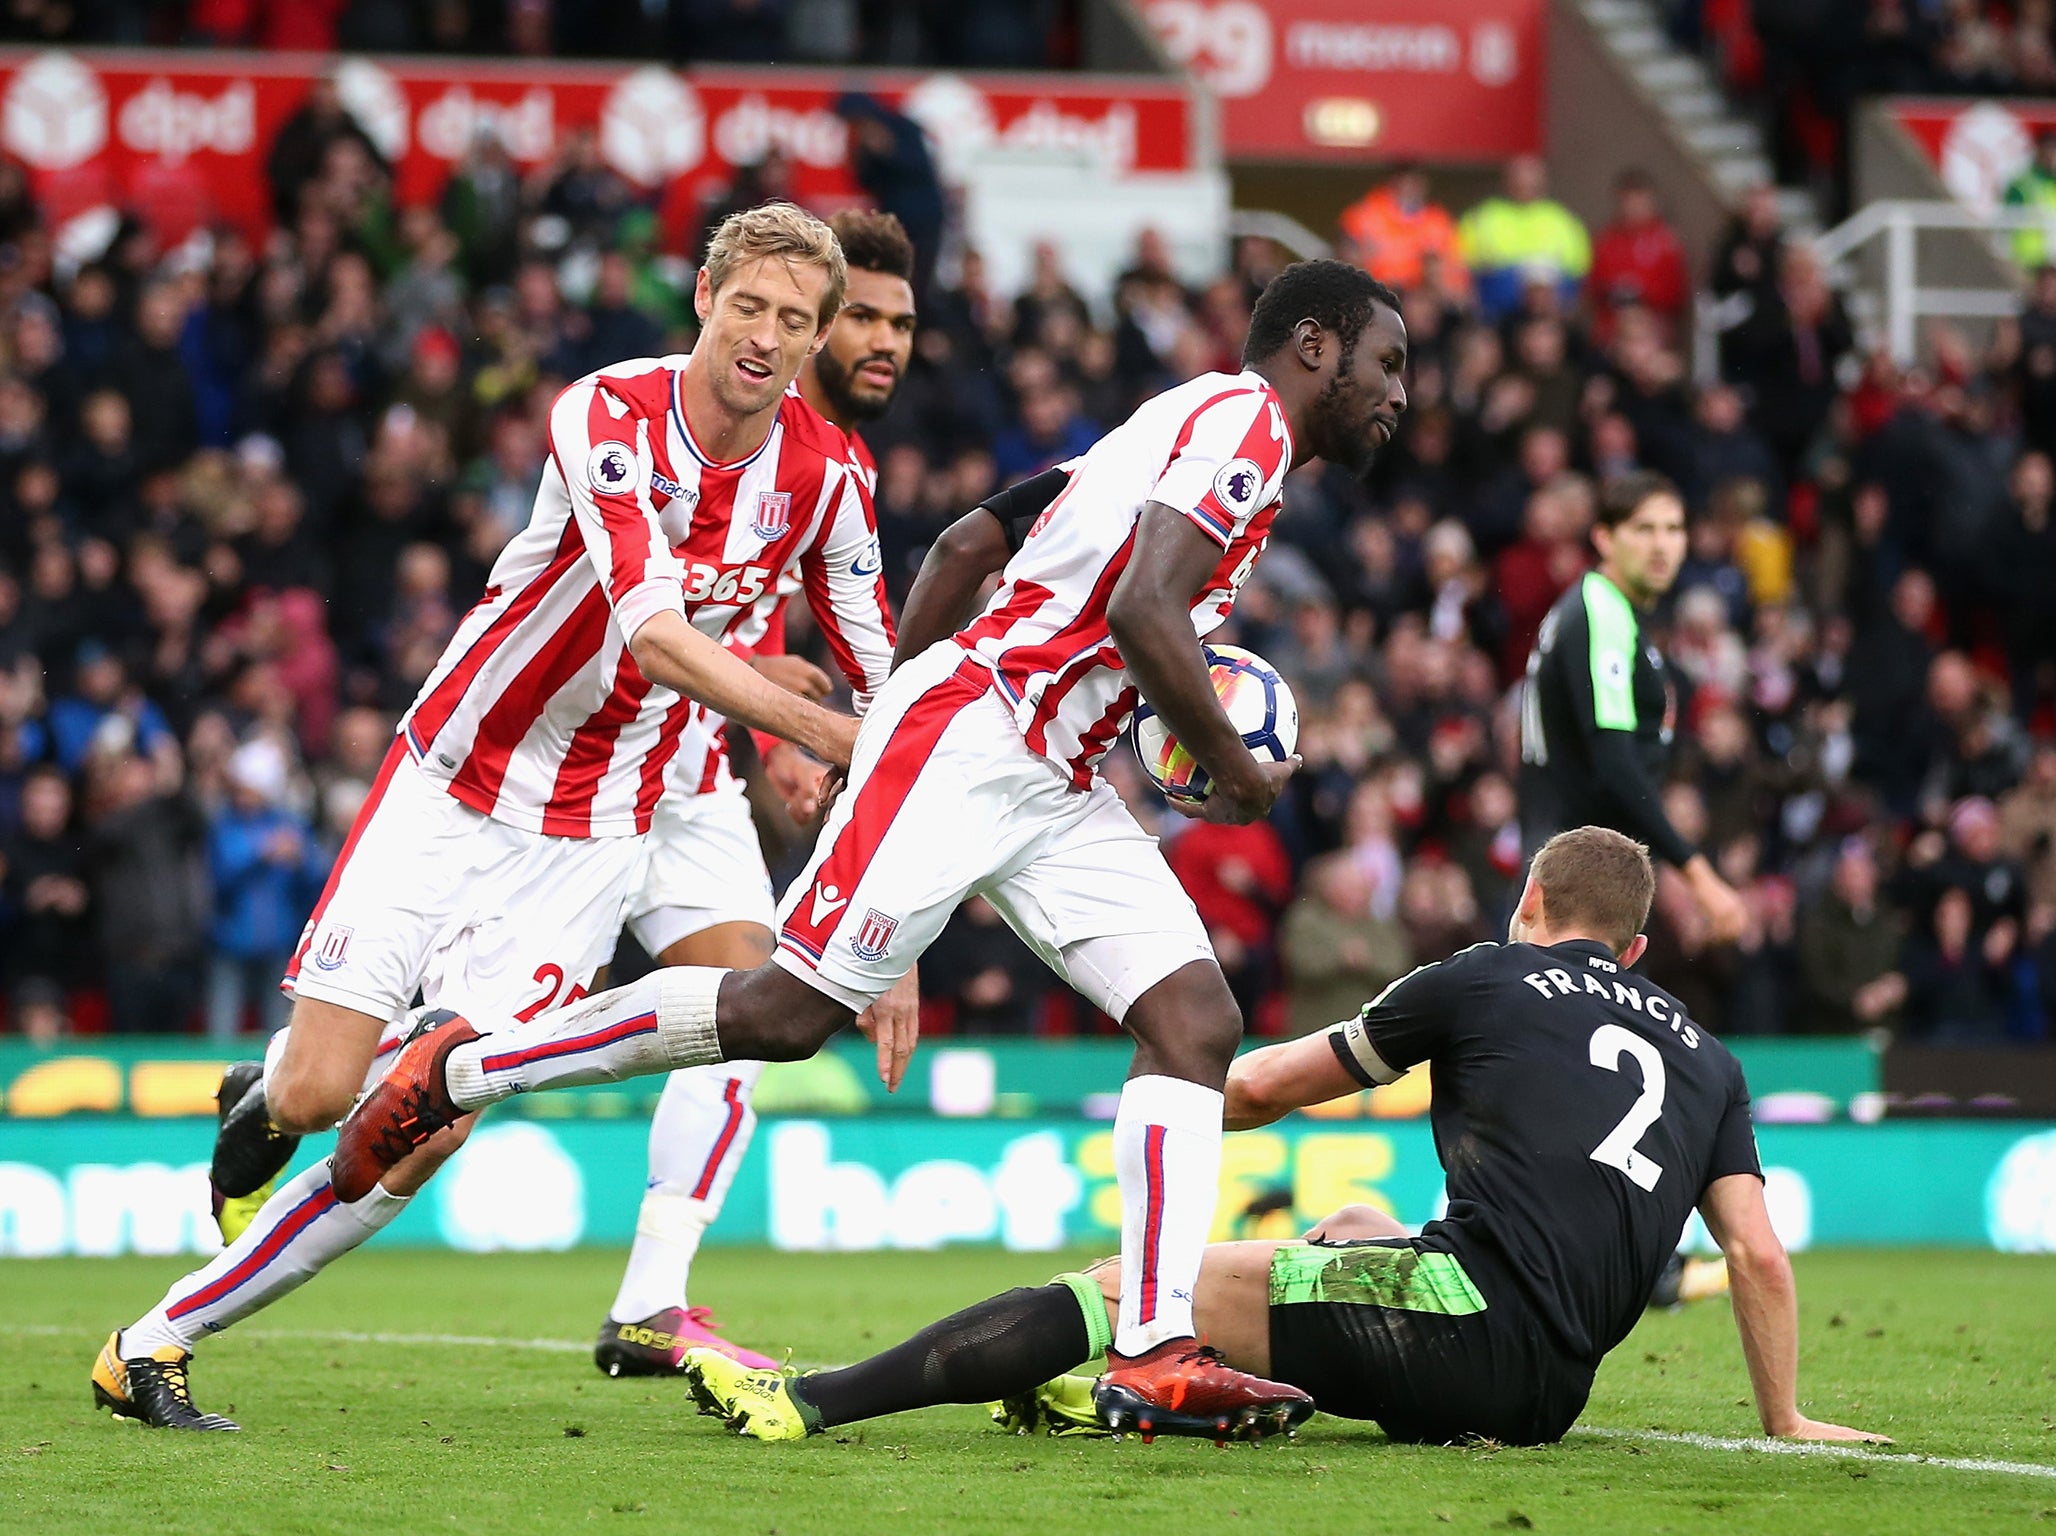 Diouf pulled one back for Stoke